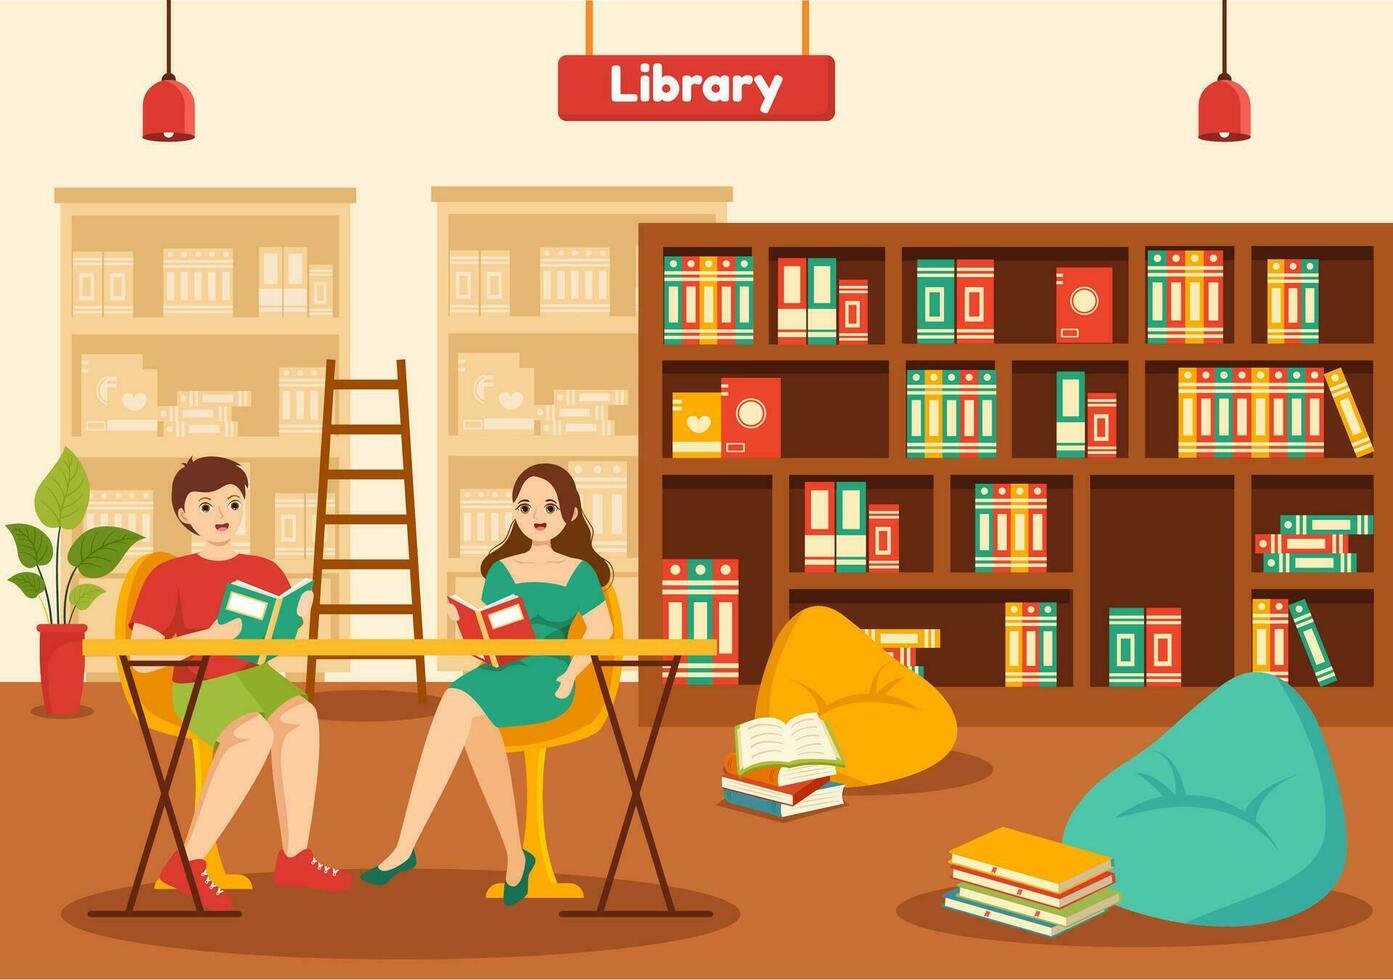 Library Vector Illustration of Book Shelves with Interior Wooden Furniture for Reading, Education and Knowledge in Flat Cartoon Background Design